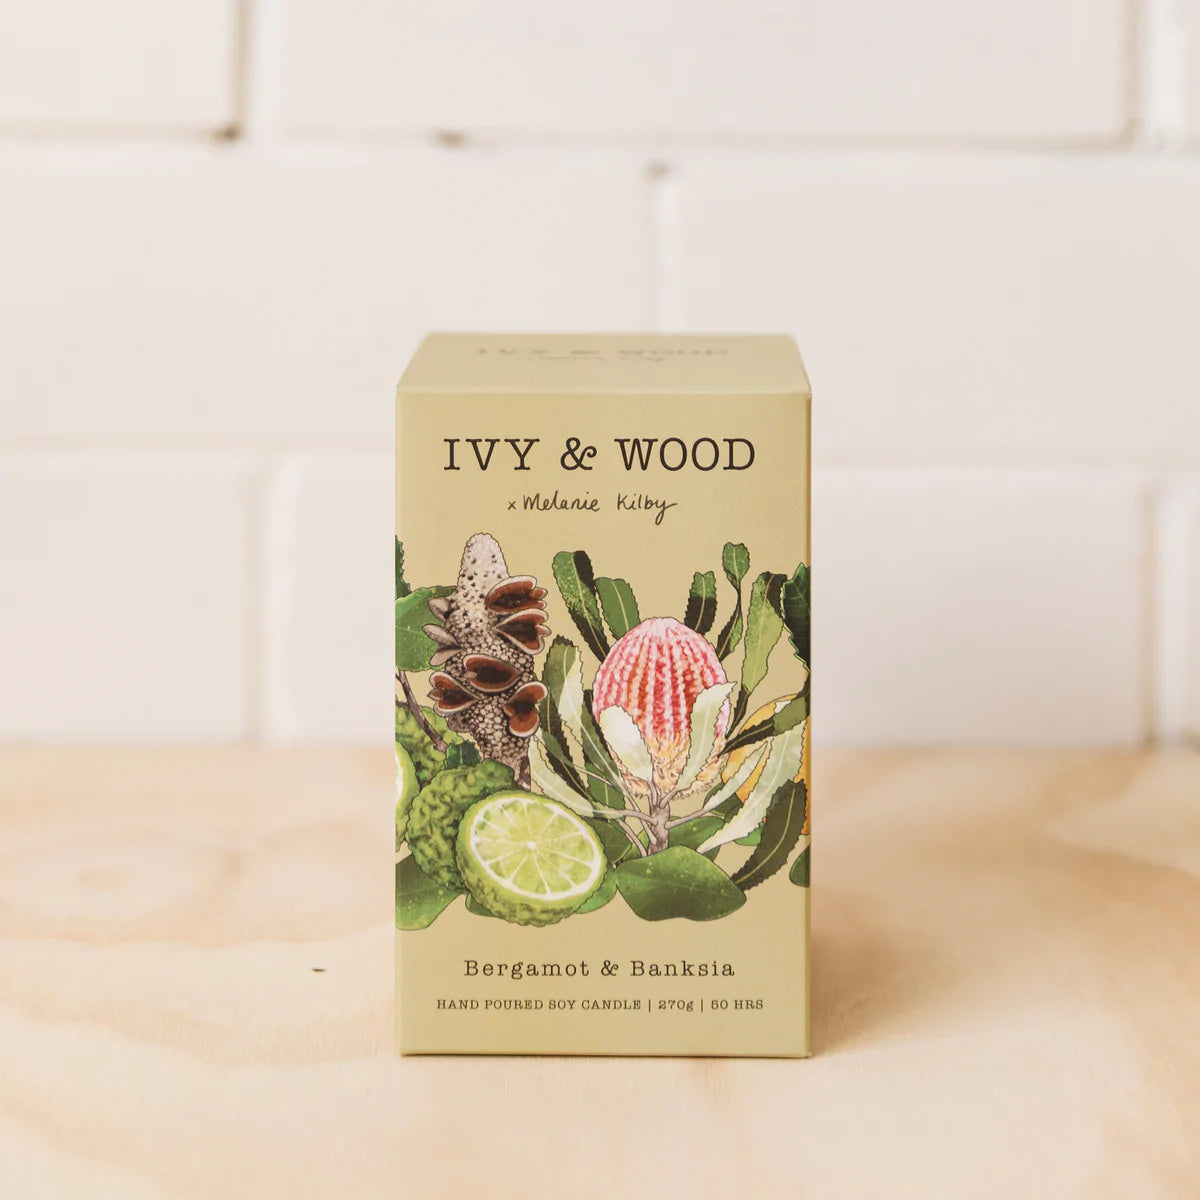 IVY & WOOD - Bergamot & Banksia Scented Candle 'Australiana' Collection